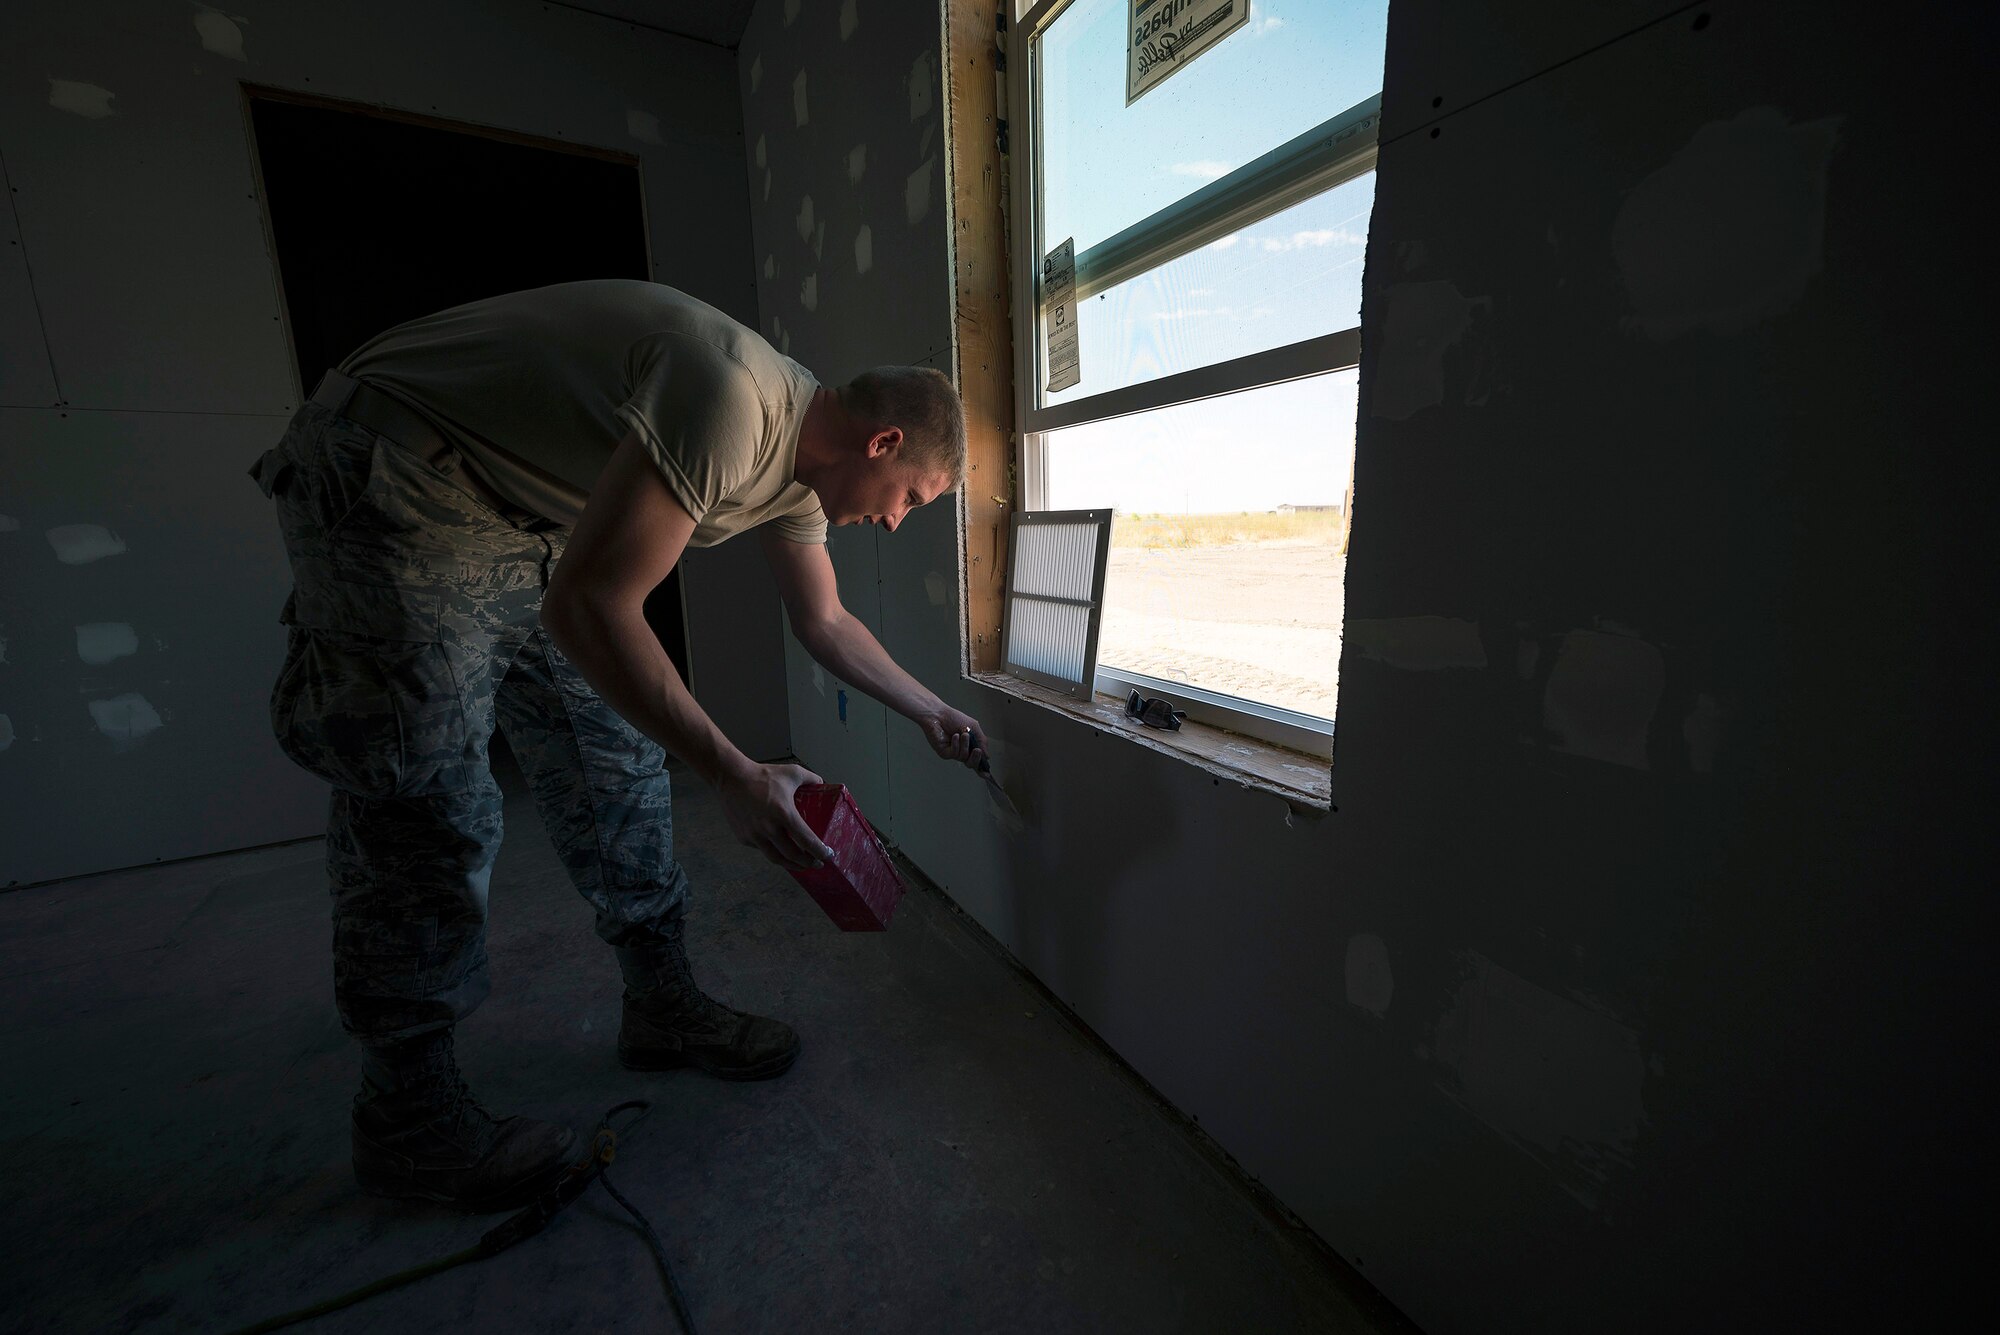 U.S. Air Force Senior Airman Drew Foes, an electrical power production specialist with the 182nd Civil Engineer Squadron, Illinois Air National Guard, applies drywall compound over screw heads in Crow Agency, Mont., July 27, 2017. The squadron helped build homes for Crow Nation veterans as part of the Department of Defense’s Innovative Readiness Training civil-military relations program. (U.S. Air National Guard photo by Tech. Sgt. Lealan Buehrer)